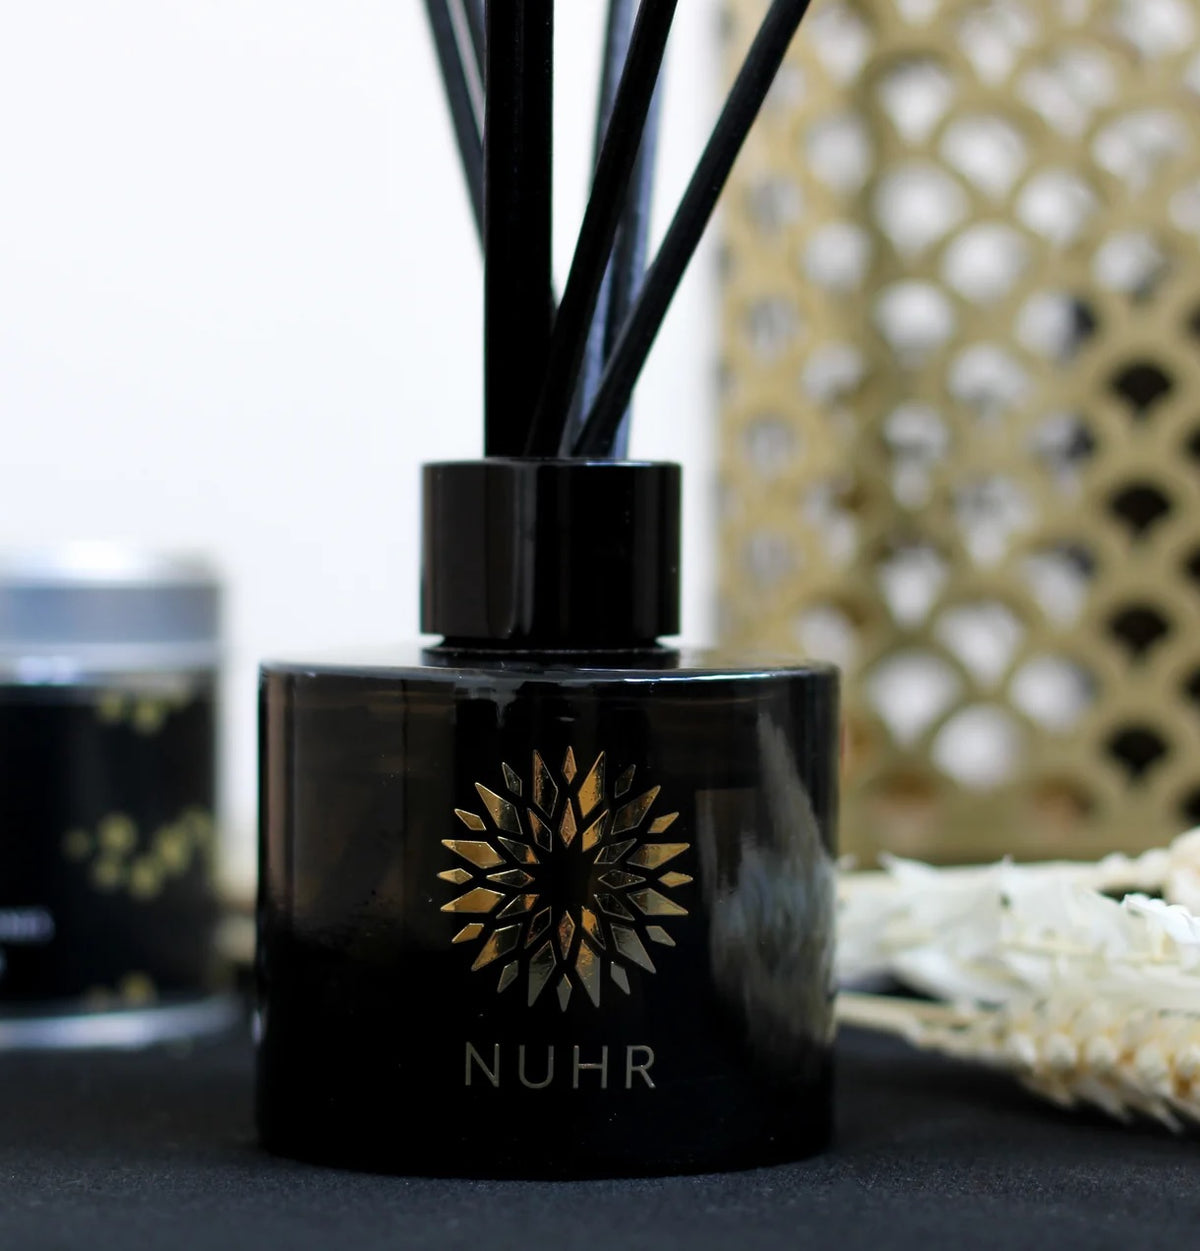 Nuhr Rose And Oud Diffuser